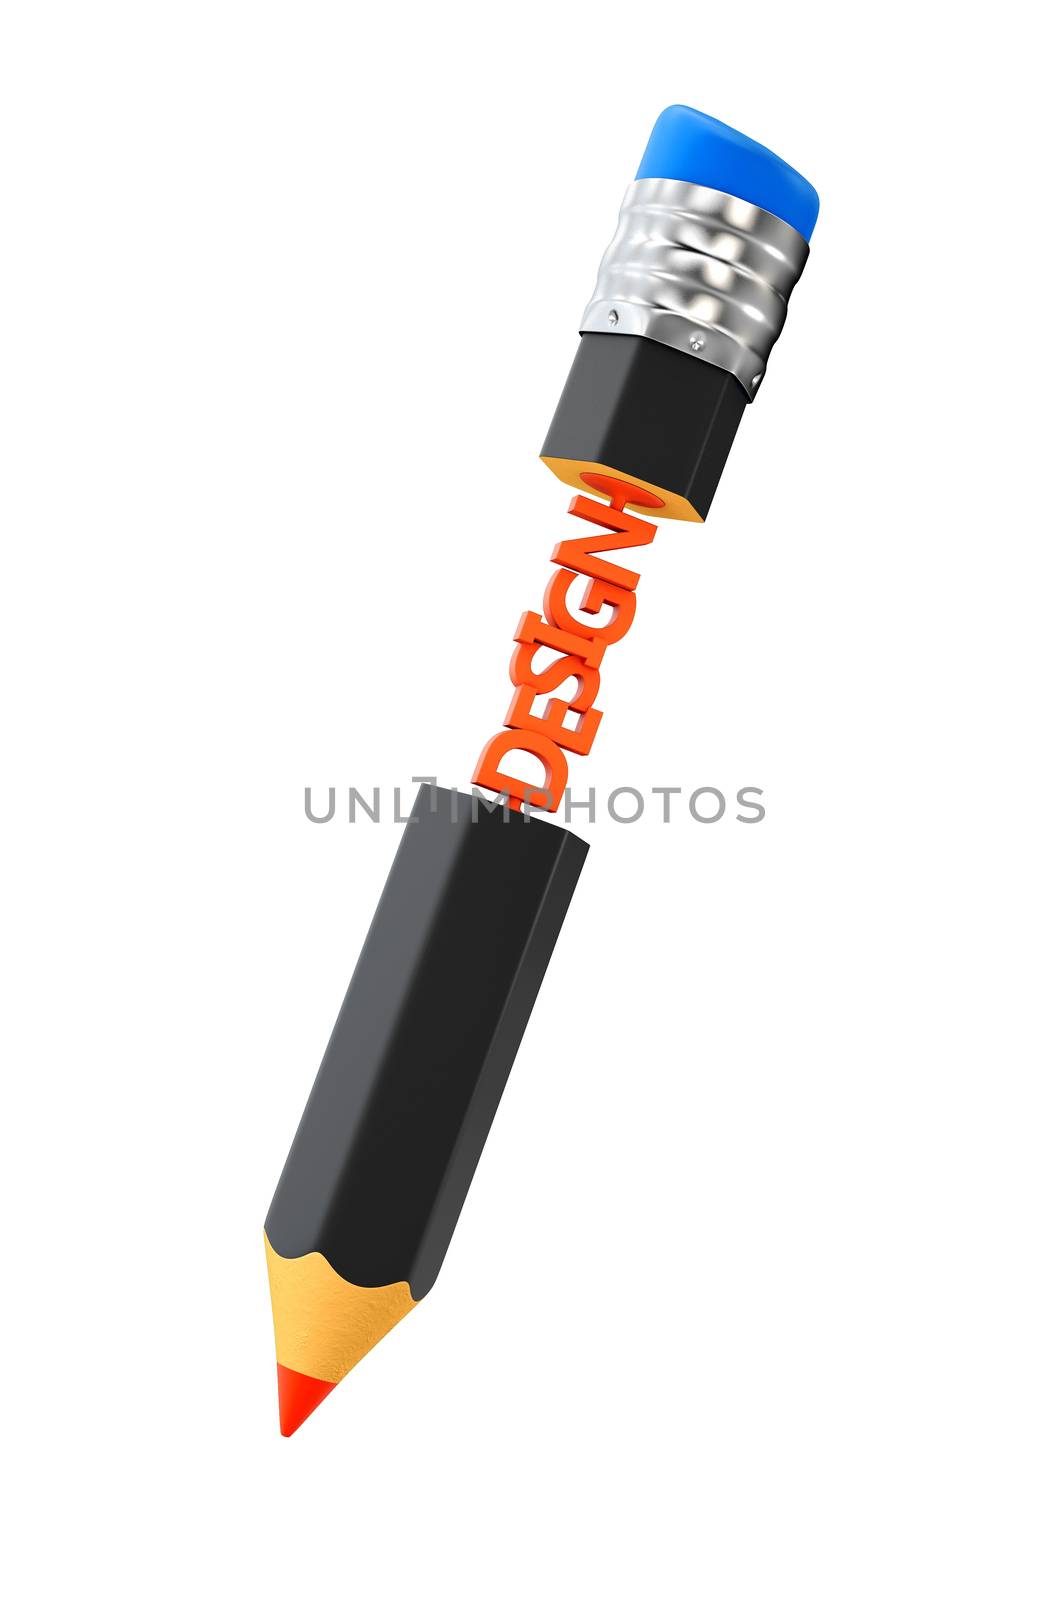 3d illustration of Creative pencil design modern layout template design by tussik